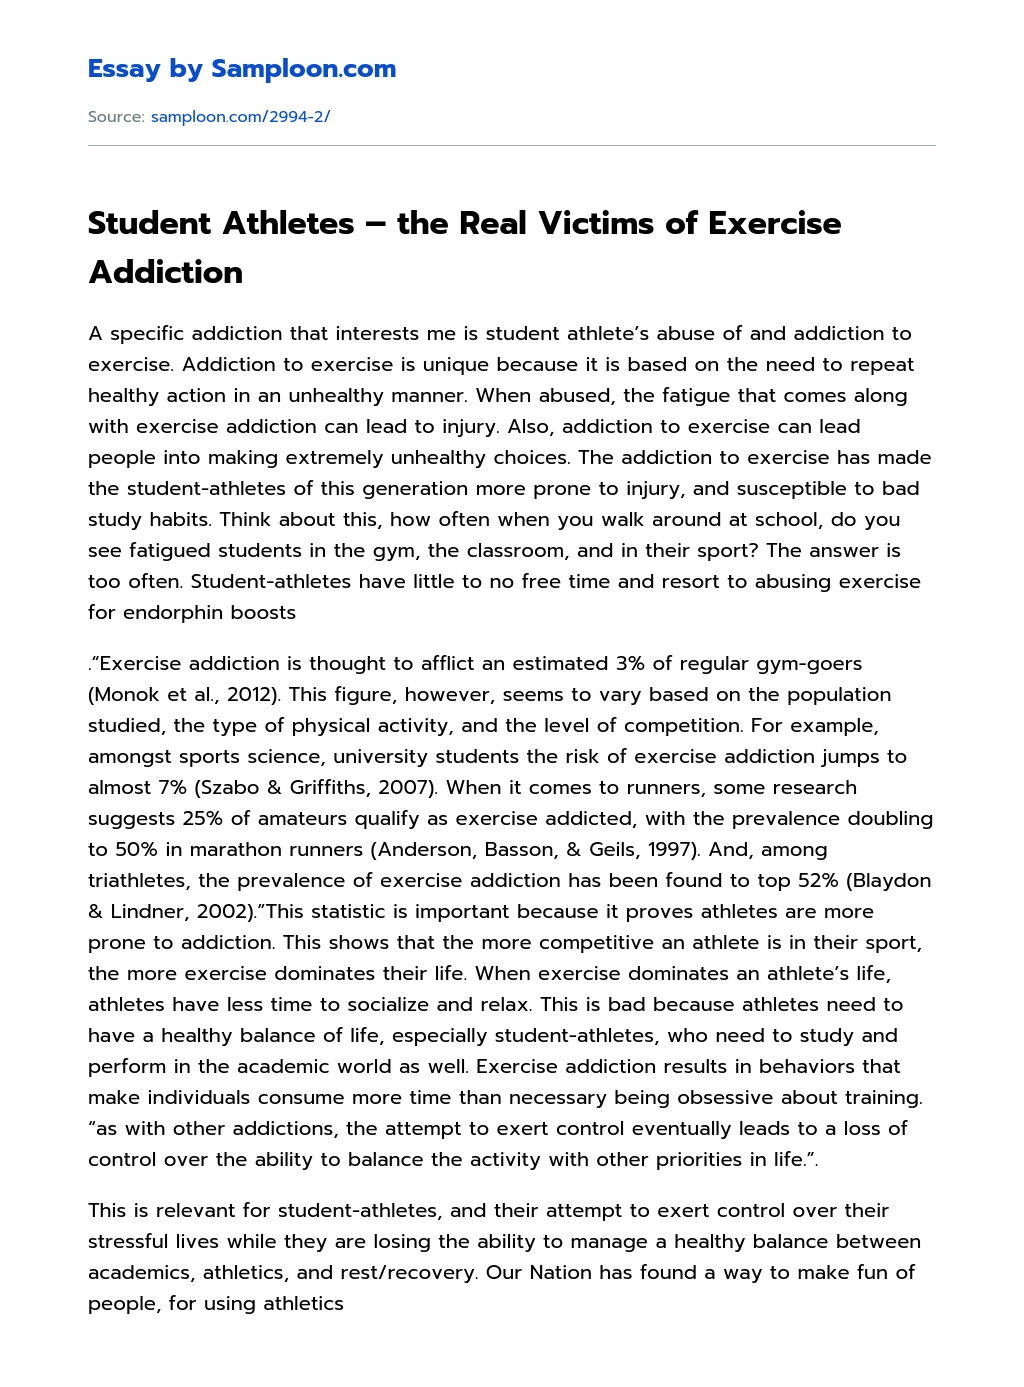 Student Athletes – the Real Victims of Exercise Addiction essay